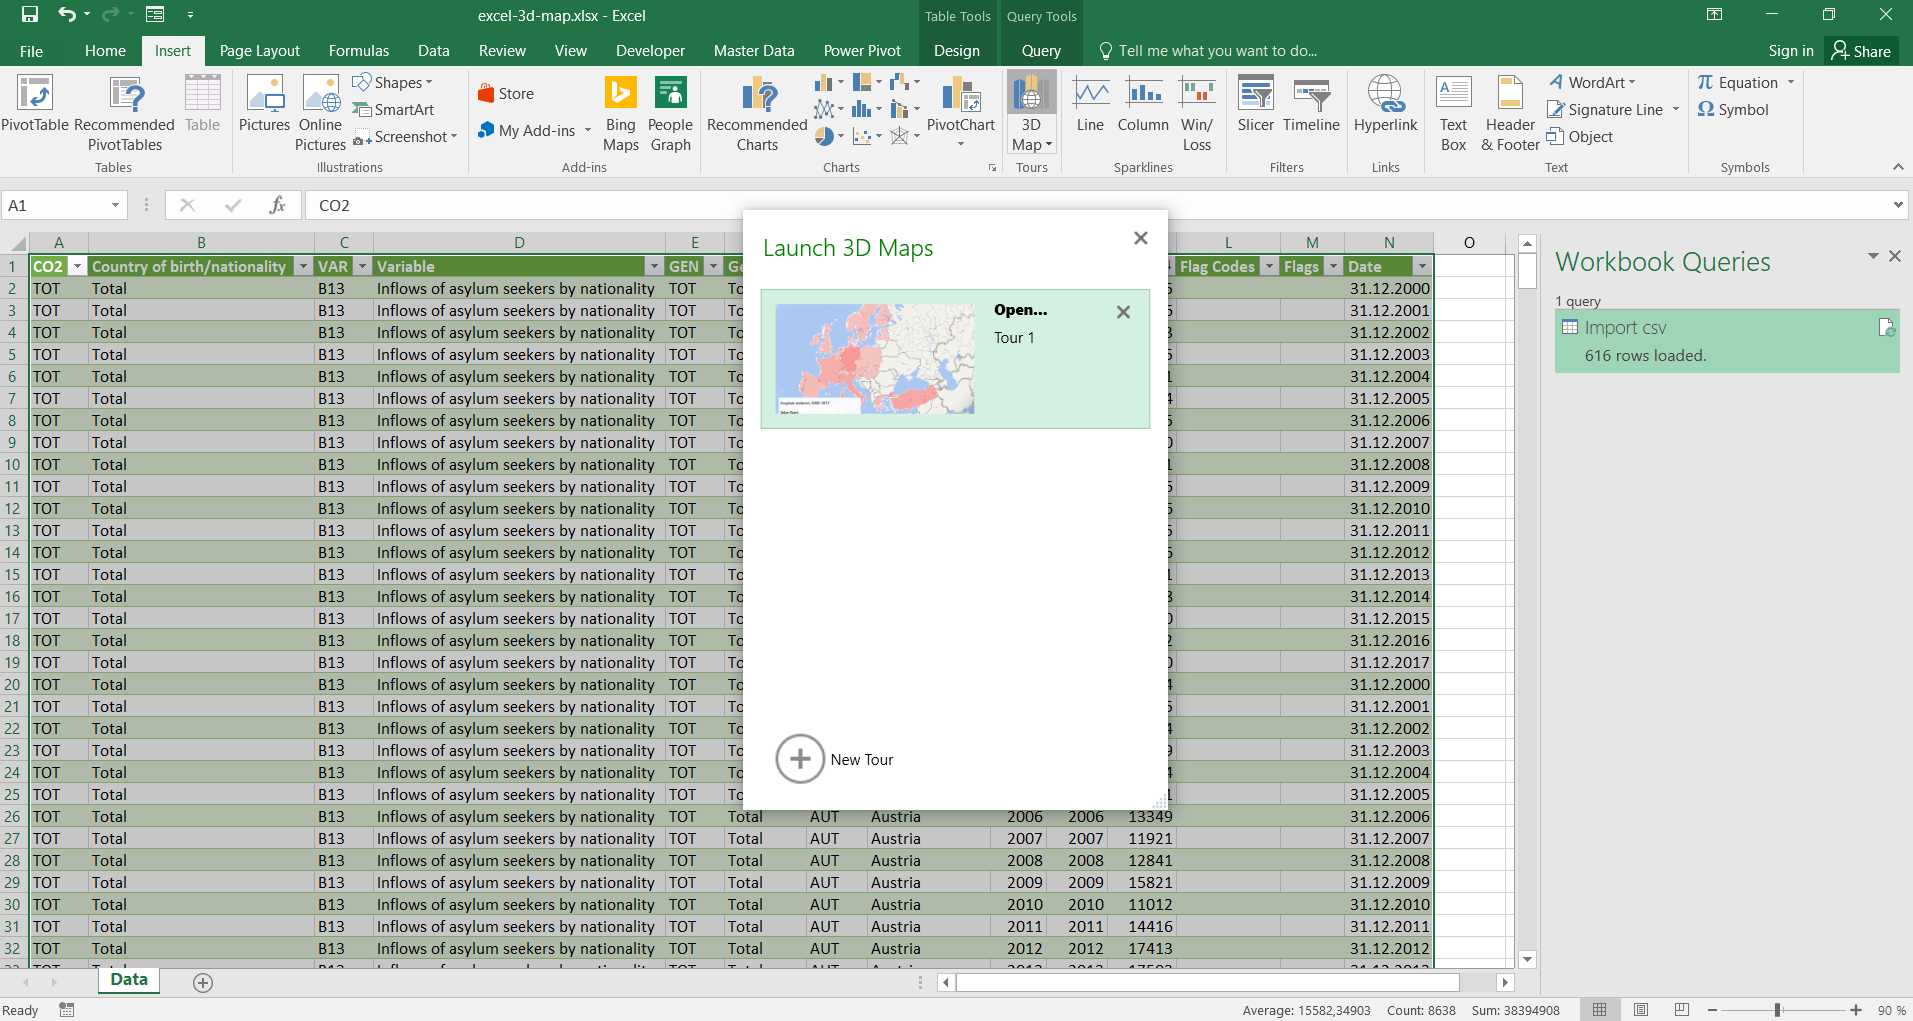 Launching Excel 3D Map. You can either create a new tour or open an existing one.